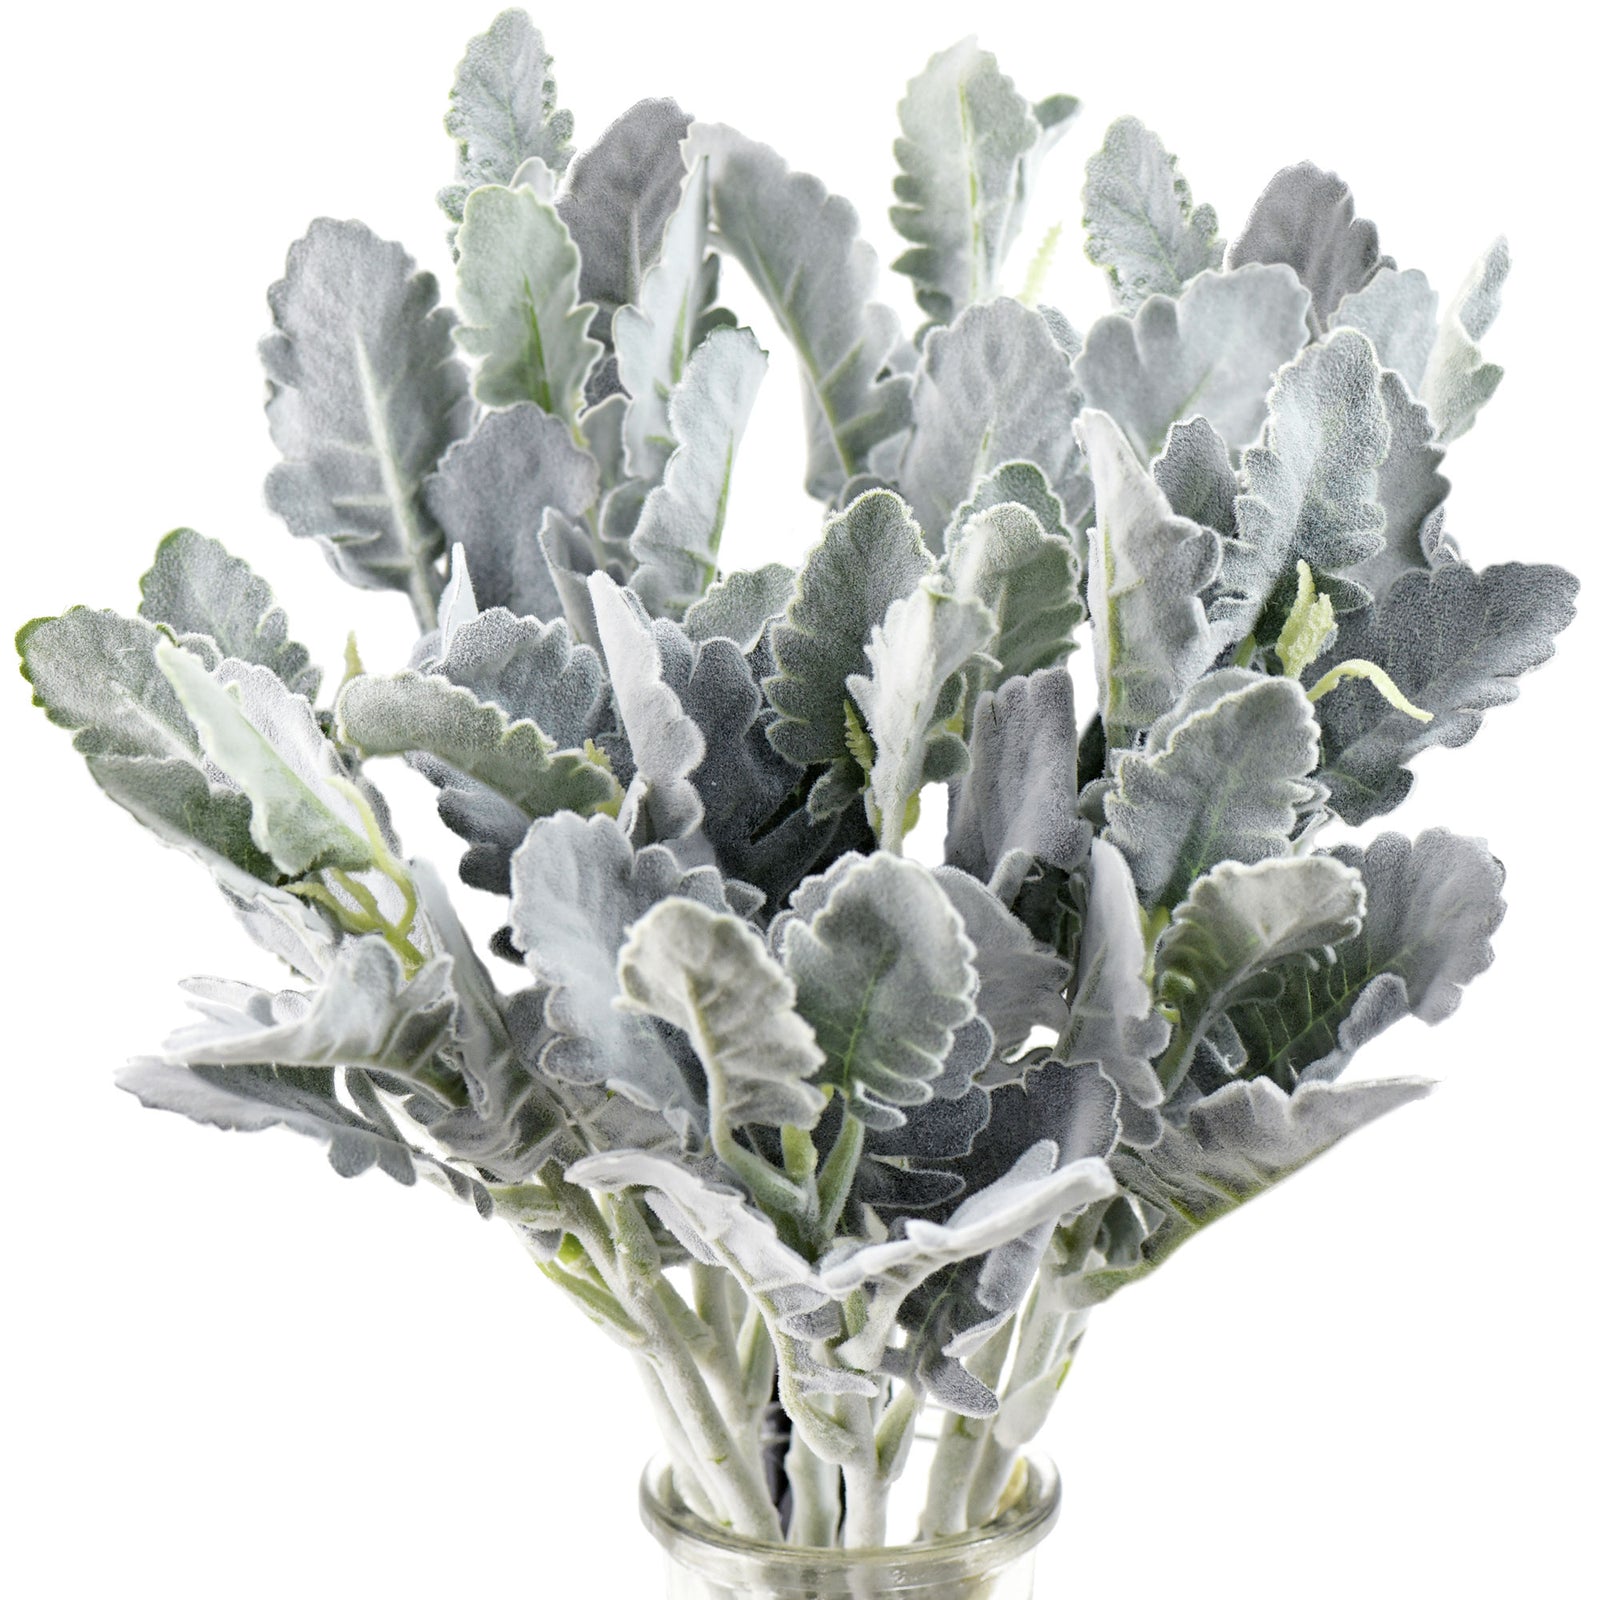 FiveSeasonStuff Dusty Miller Artificial Greenery Bush Plants for Wedding Flower Fillers DIY Bouquets and Floral Arrangements (12 Stems 14 inches Tall)